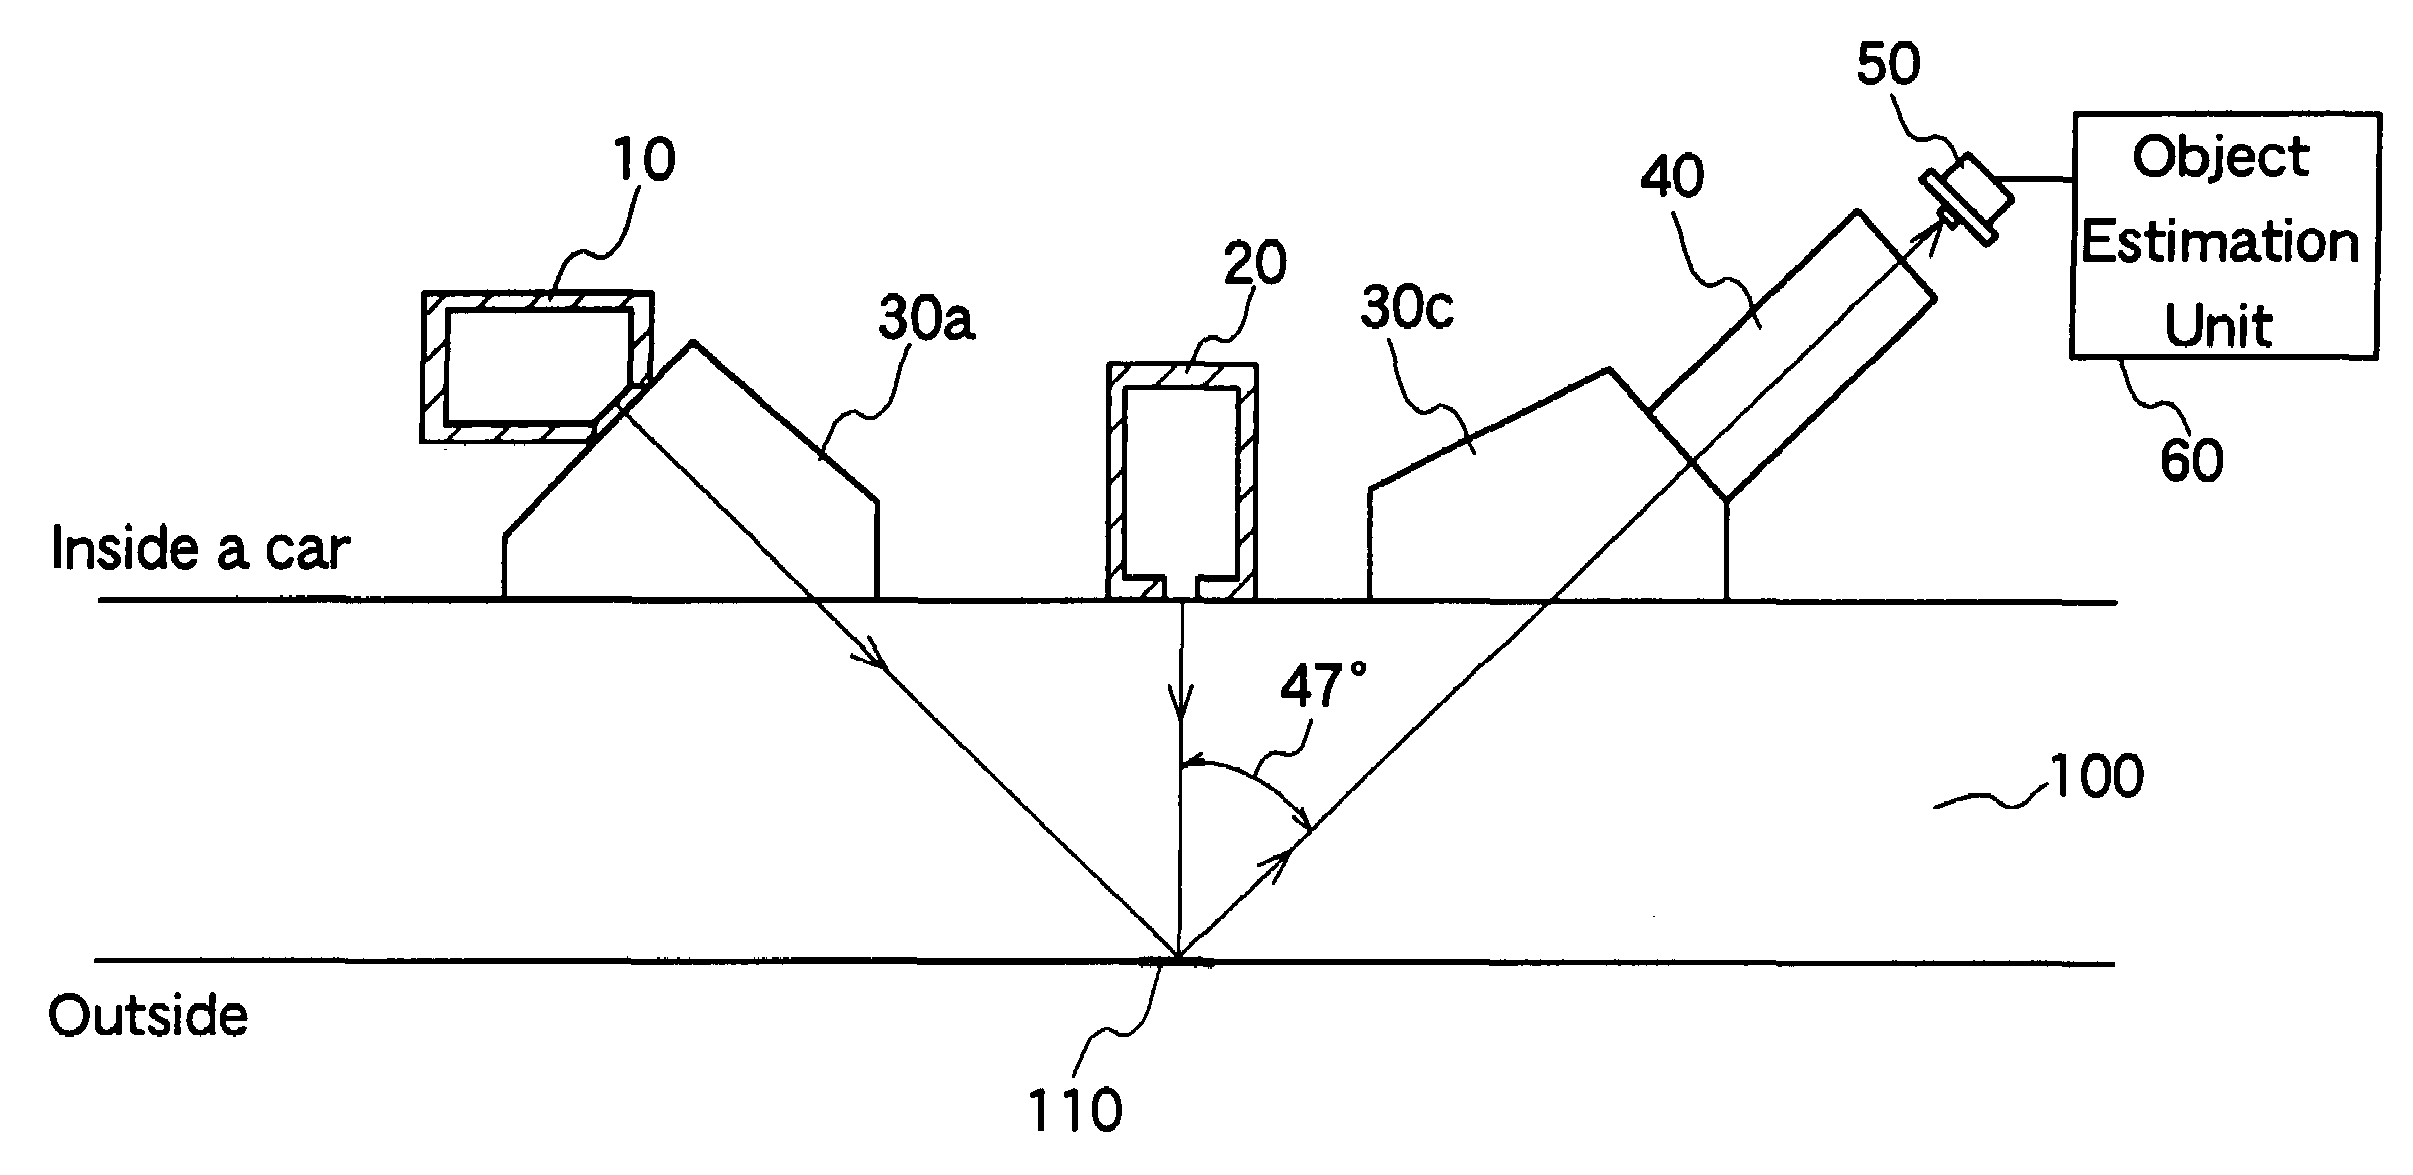 Deposit detector and control device using it